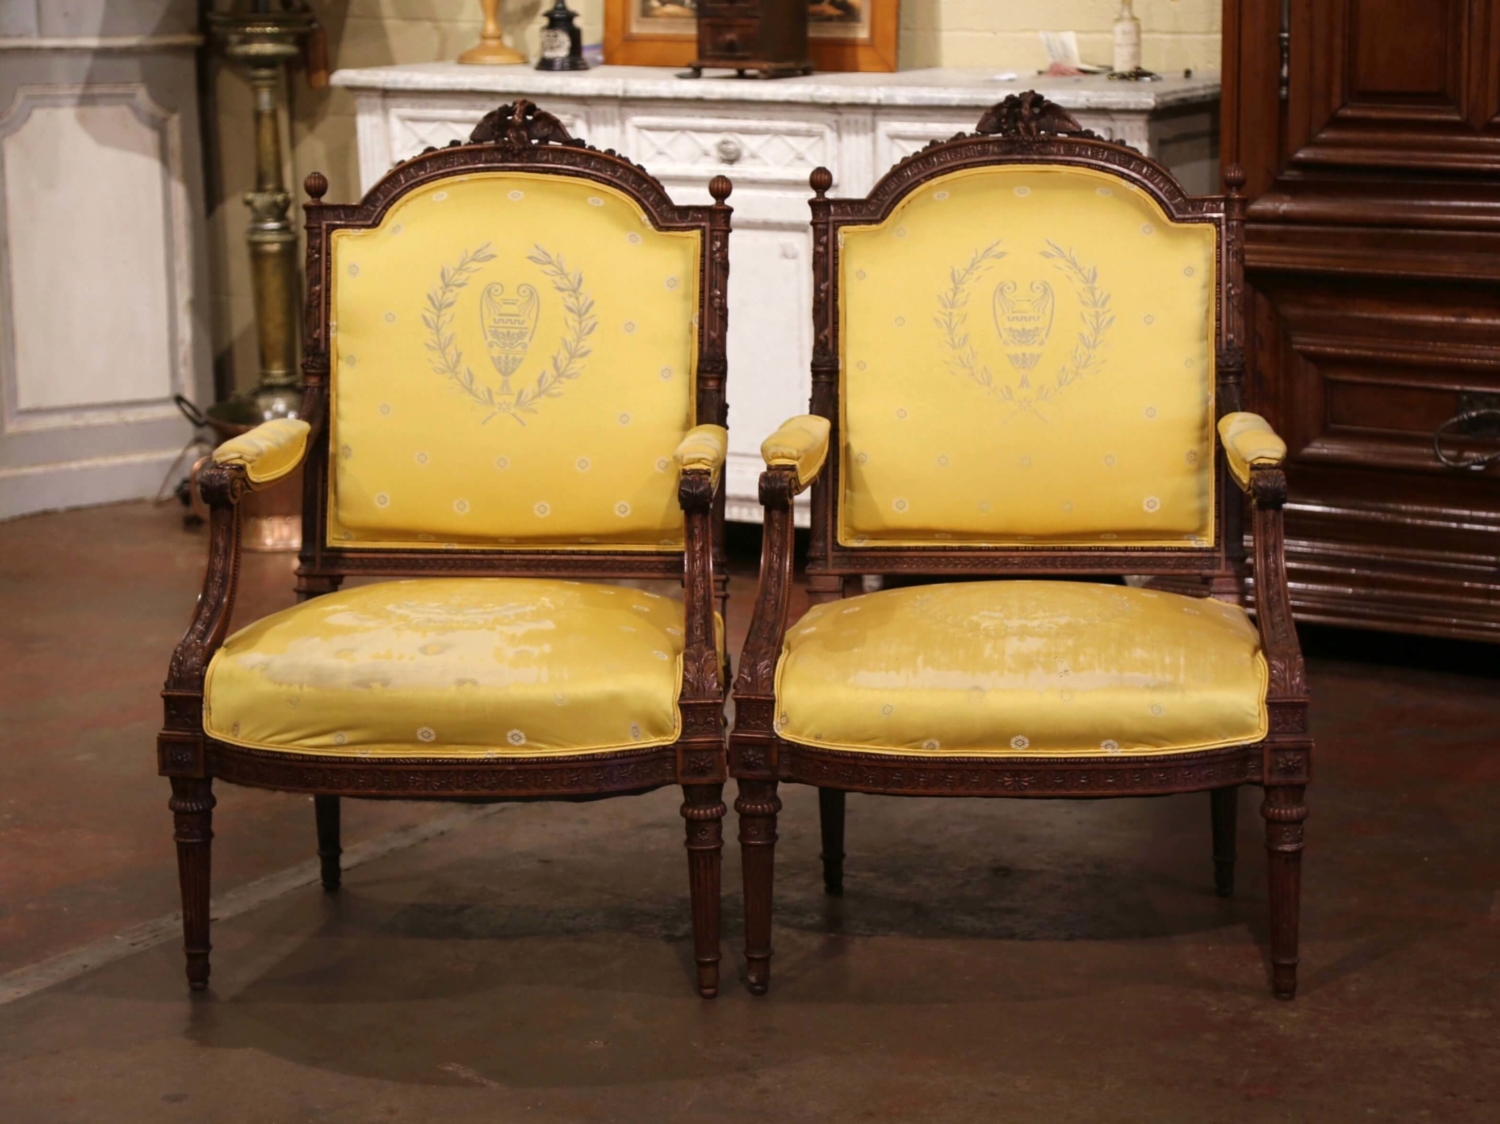 At Auction: A pair of Louis XVI style walnut framed tub chairs